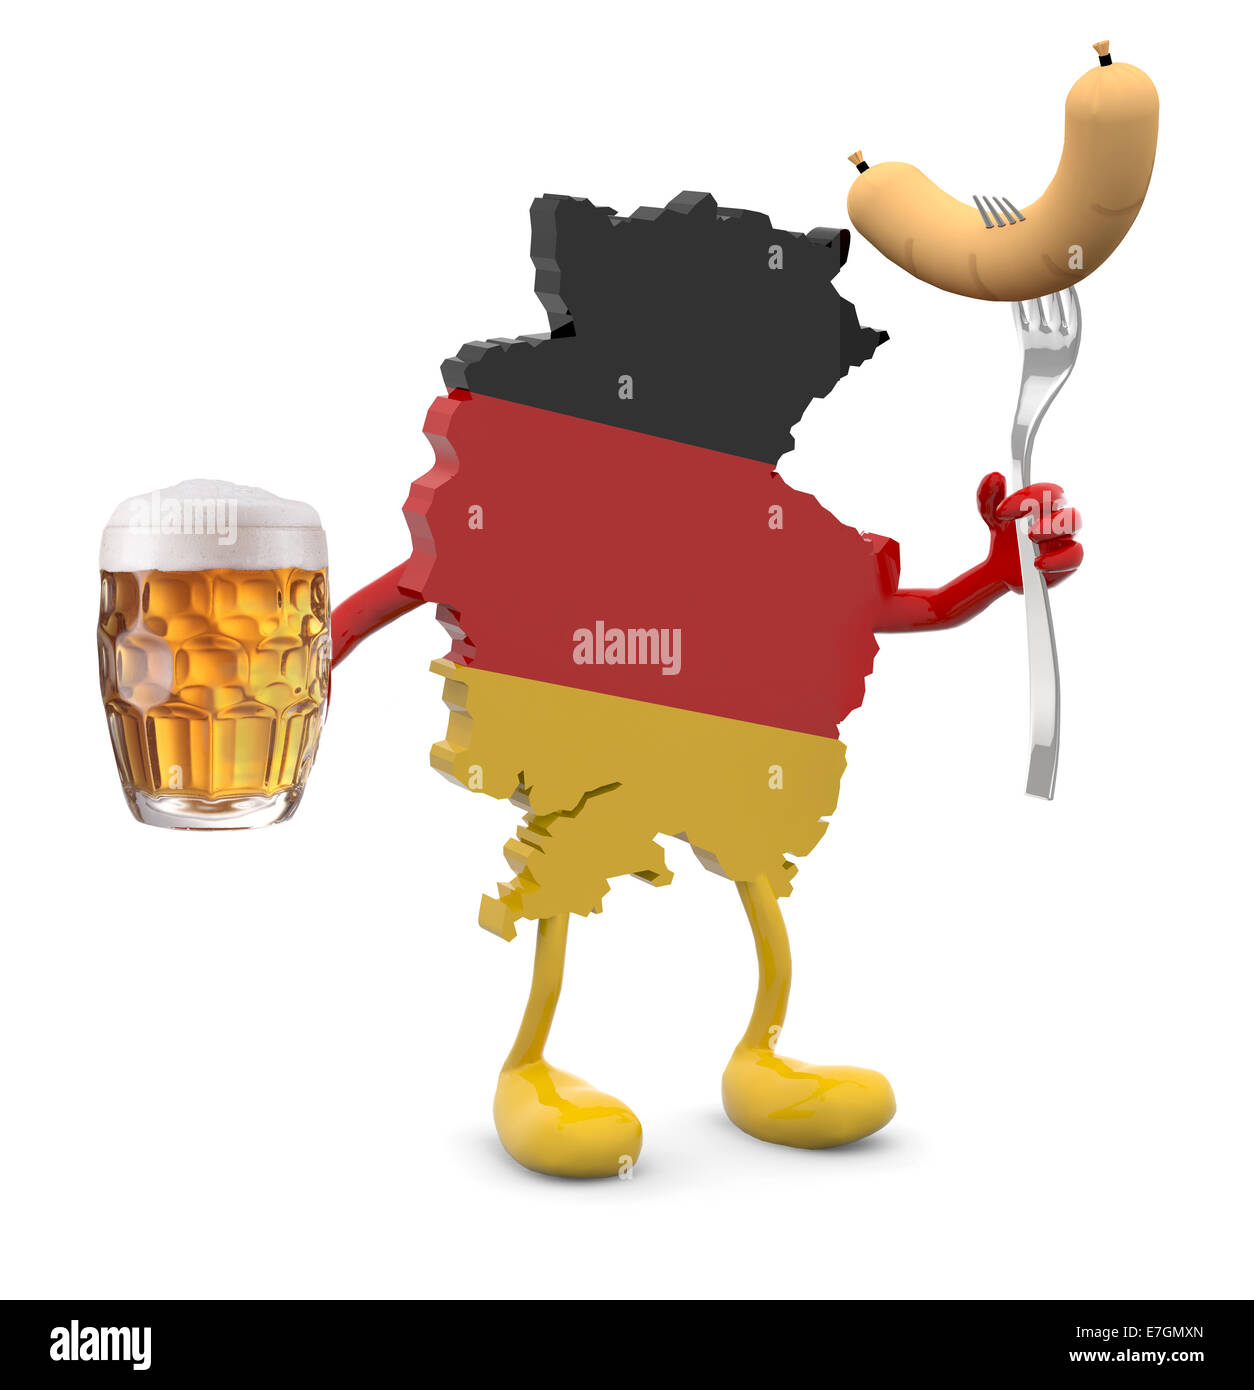 germany map with arms, legs, glass mug of beer and wurstel on hands, 3d illustration Stock Photo